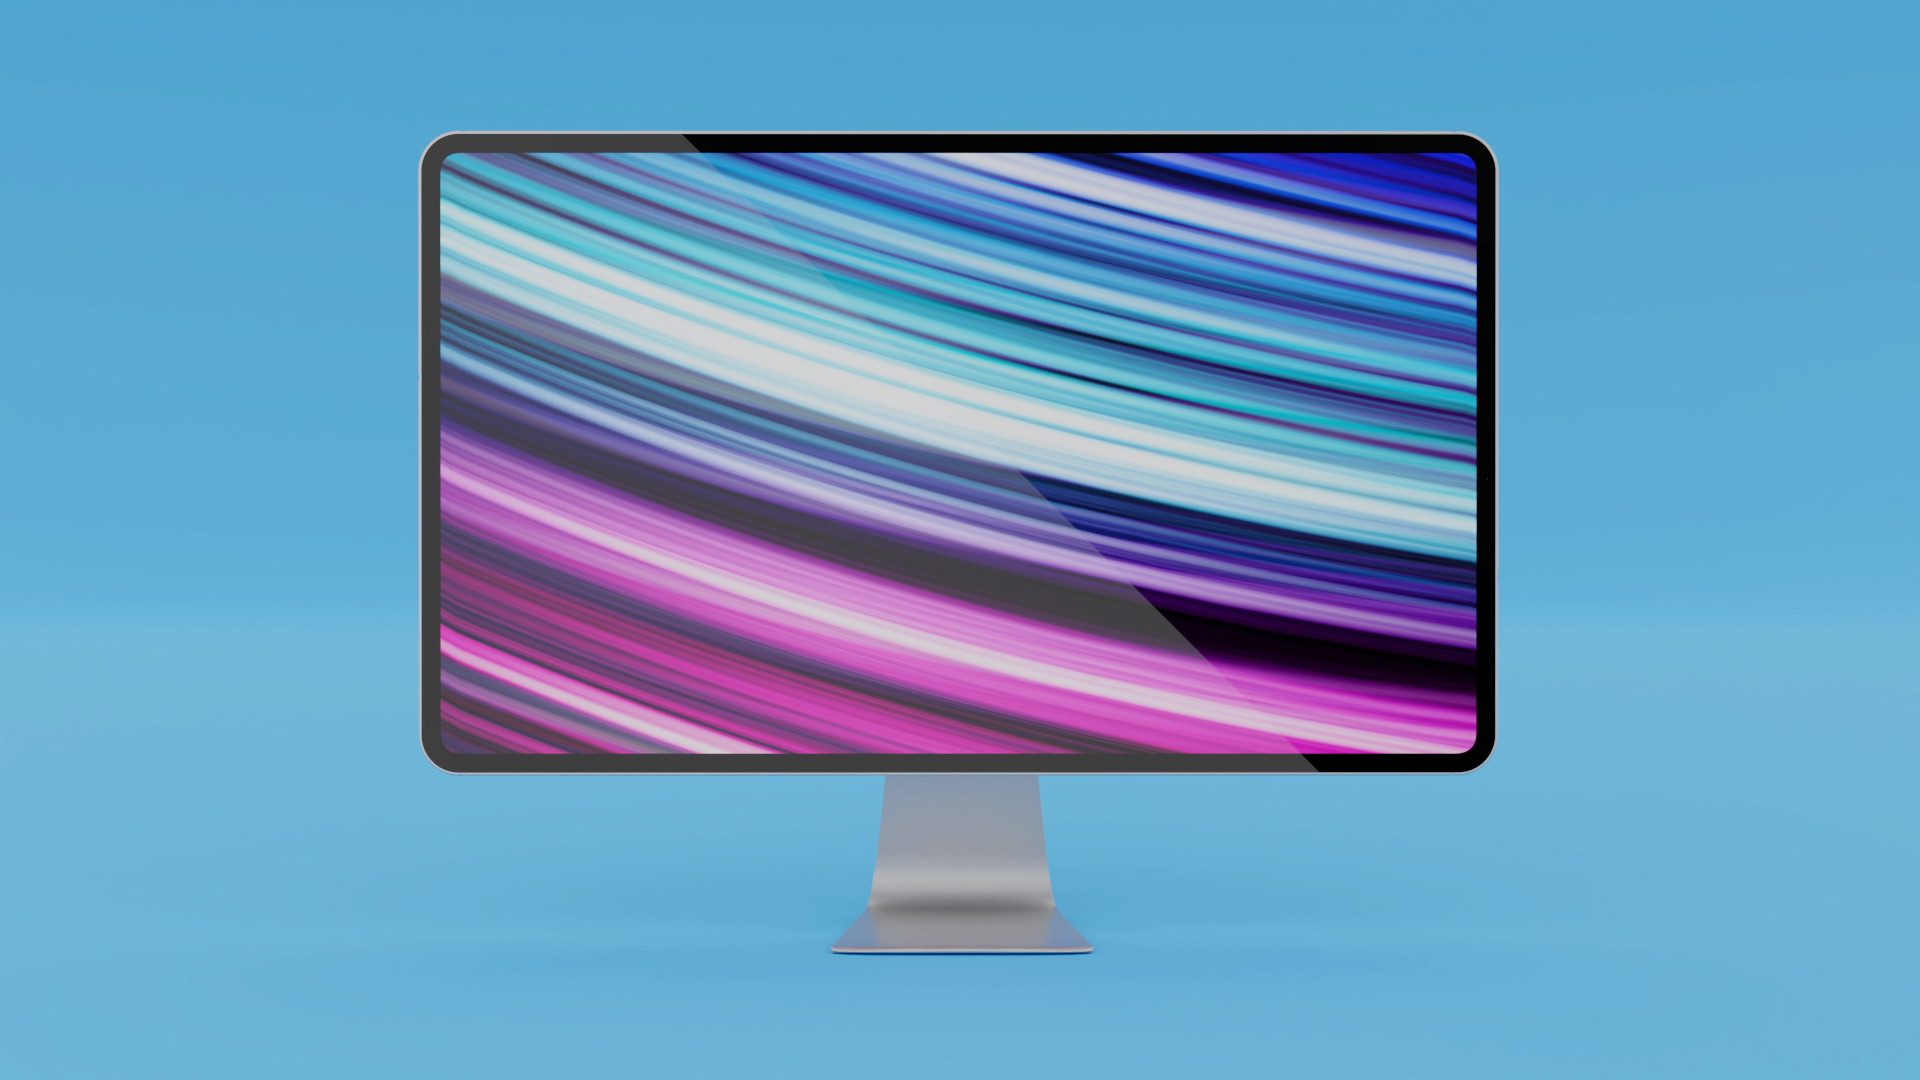 Unreleased Imac With 10 Core Comet Lake S Chip And Radeon Pro 5300